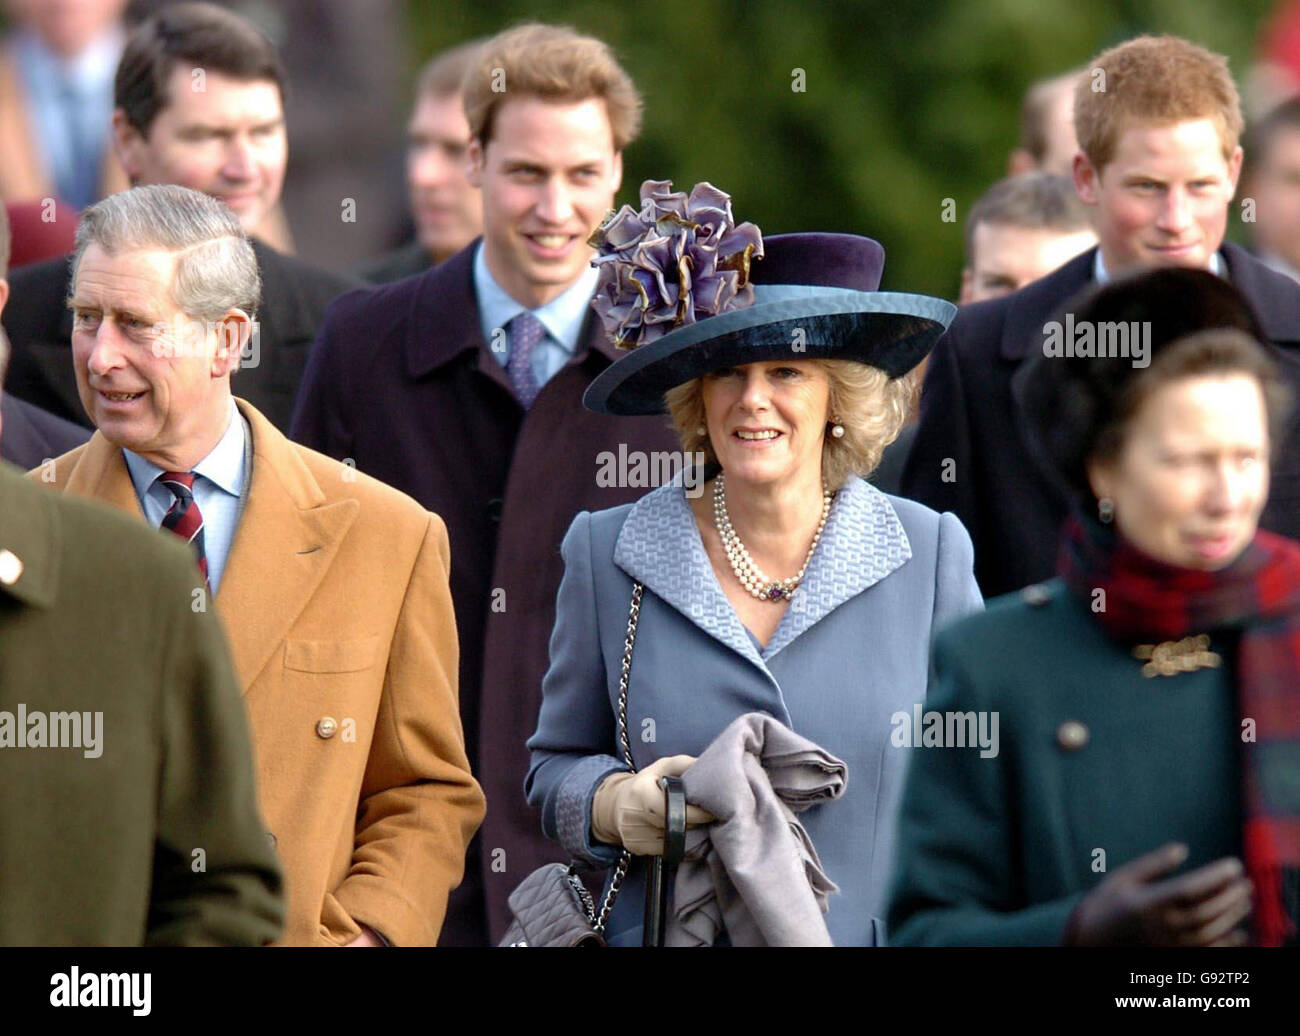 The Prince of Wales and The Duchess of Cornwall arrive with members of the royal family for the Christmas Day church service, Sunday December 25, 2005, St Mary Magdalene Church. See PA story ROYAL Church. PRESS ASSOCIATION Photo. Photo credit should read: Chris Radburn/WPA rota/PA Stock Photo